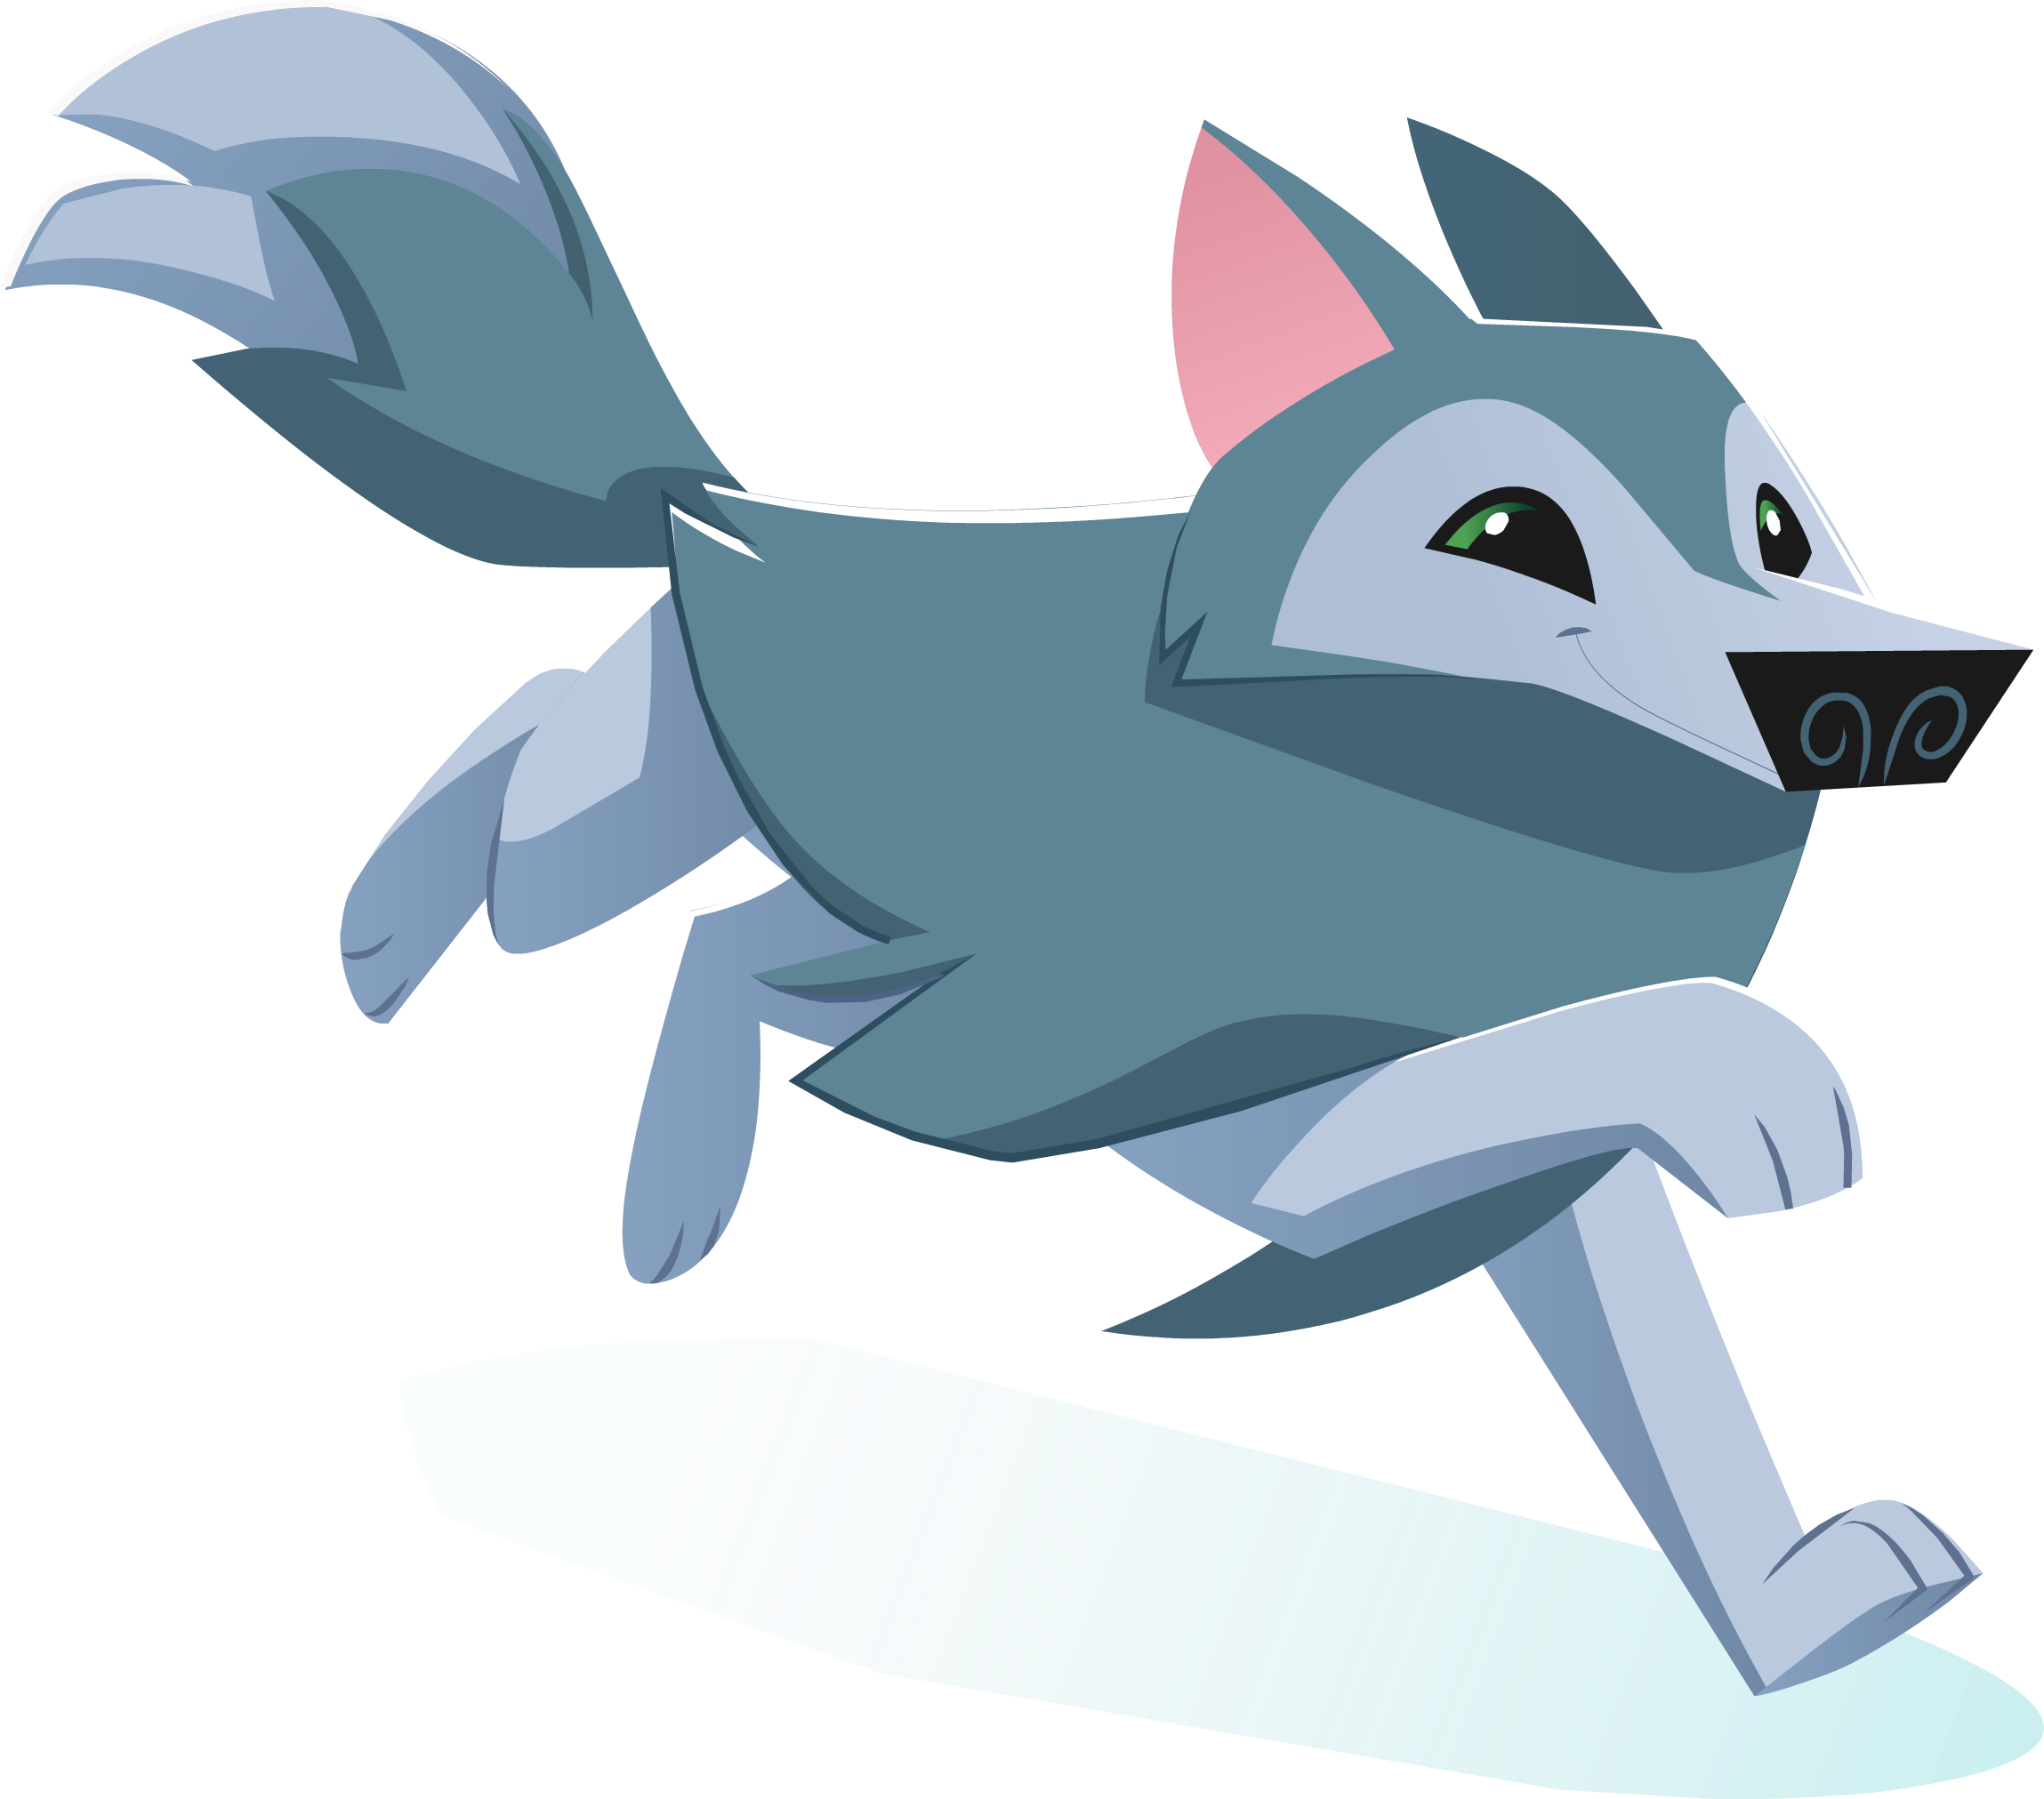 Wolf clipart magic. Image arctic graphic png